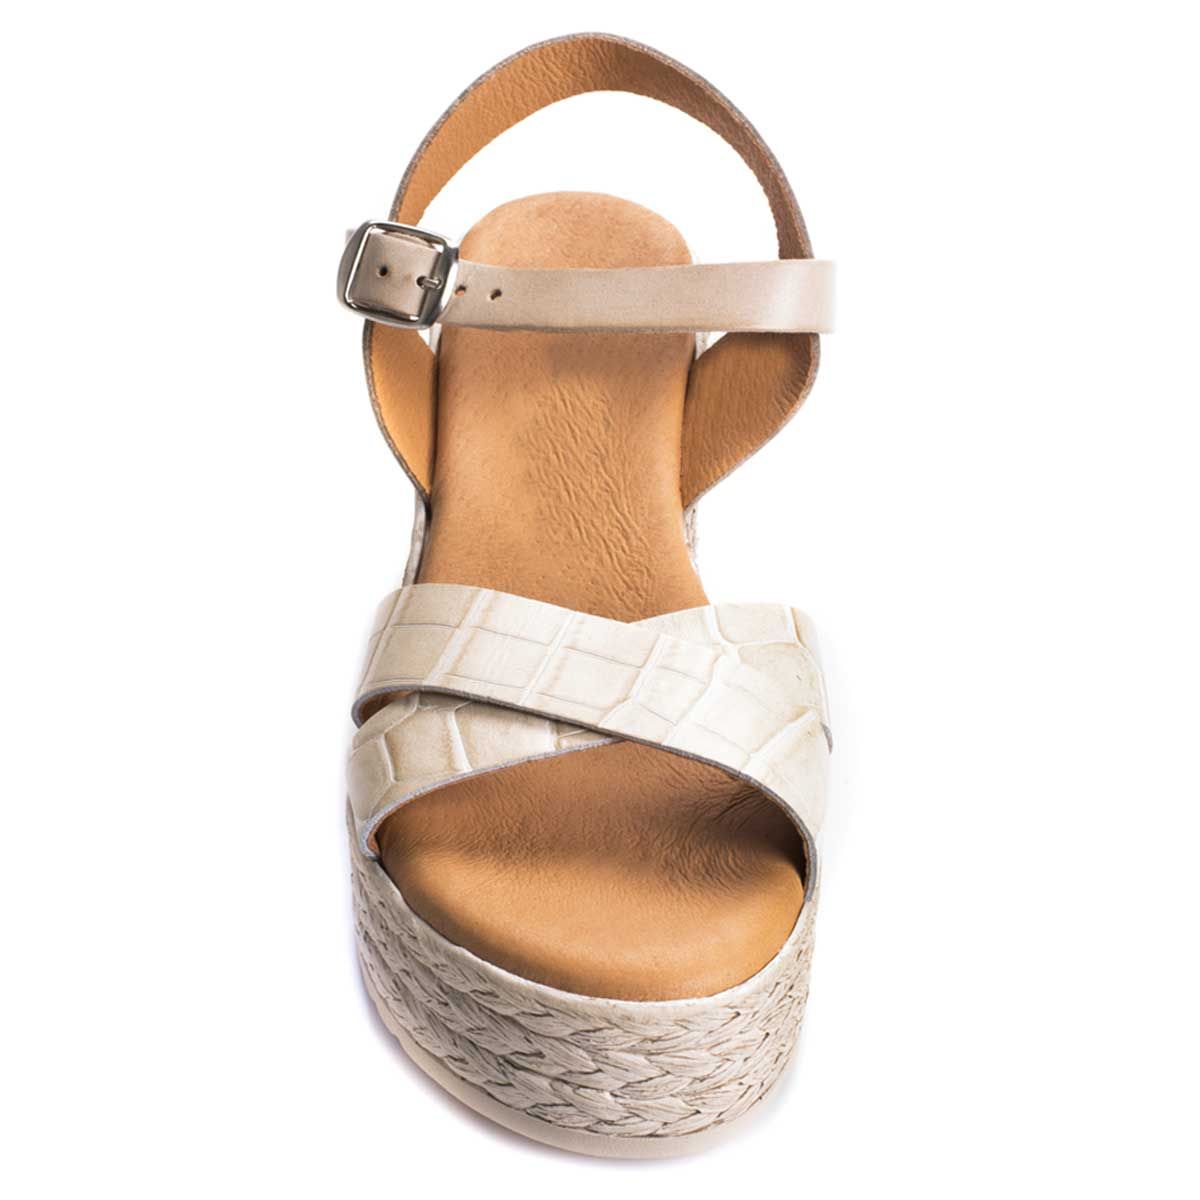 Light Sandal by Wikers collection for the brand. Manufactured in natural and top quality materials. Comfortable and perfect for day to day. Comfort contribute several factors such as the perfectly studied term; The gel plant that is perfectly adapted to each footprint as well as a viscoelastic mattress adapts to the shape of your body when you sleep and finally the floor that thanks to its lightness provides greater comfort. The skin used is free of chrome VI. The floor is of light anti-slip and resistant polyurethane. Manufactured in Spain in factories of traditional tradition.